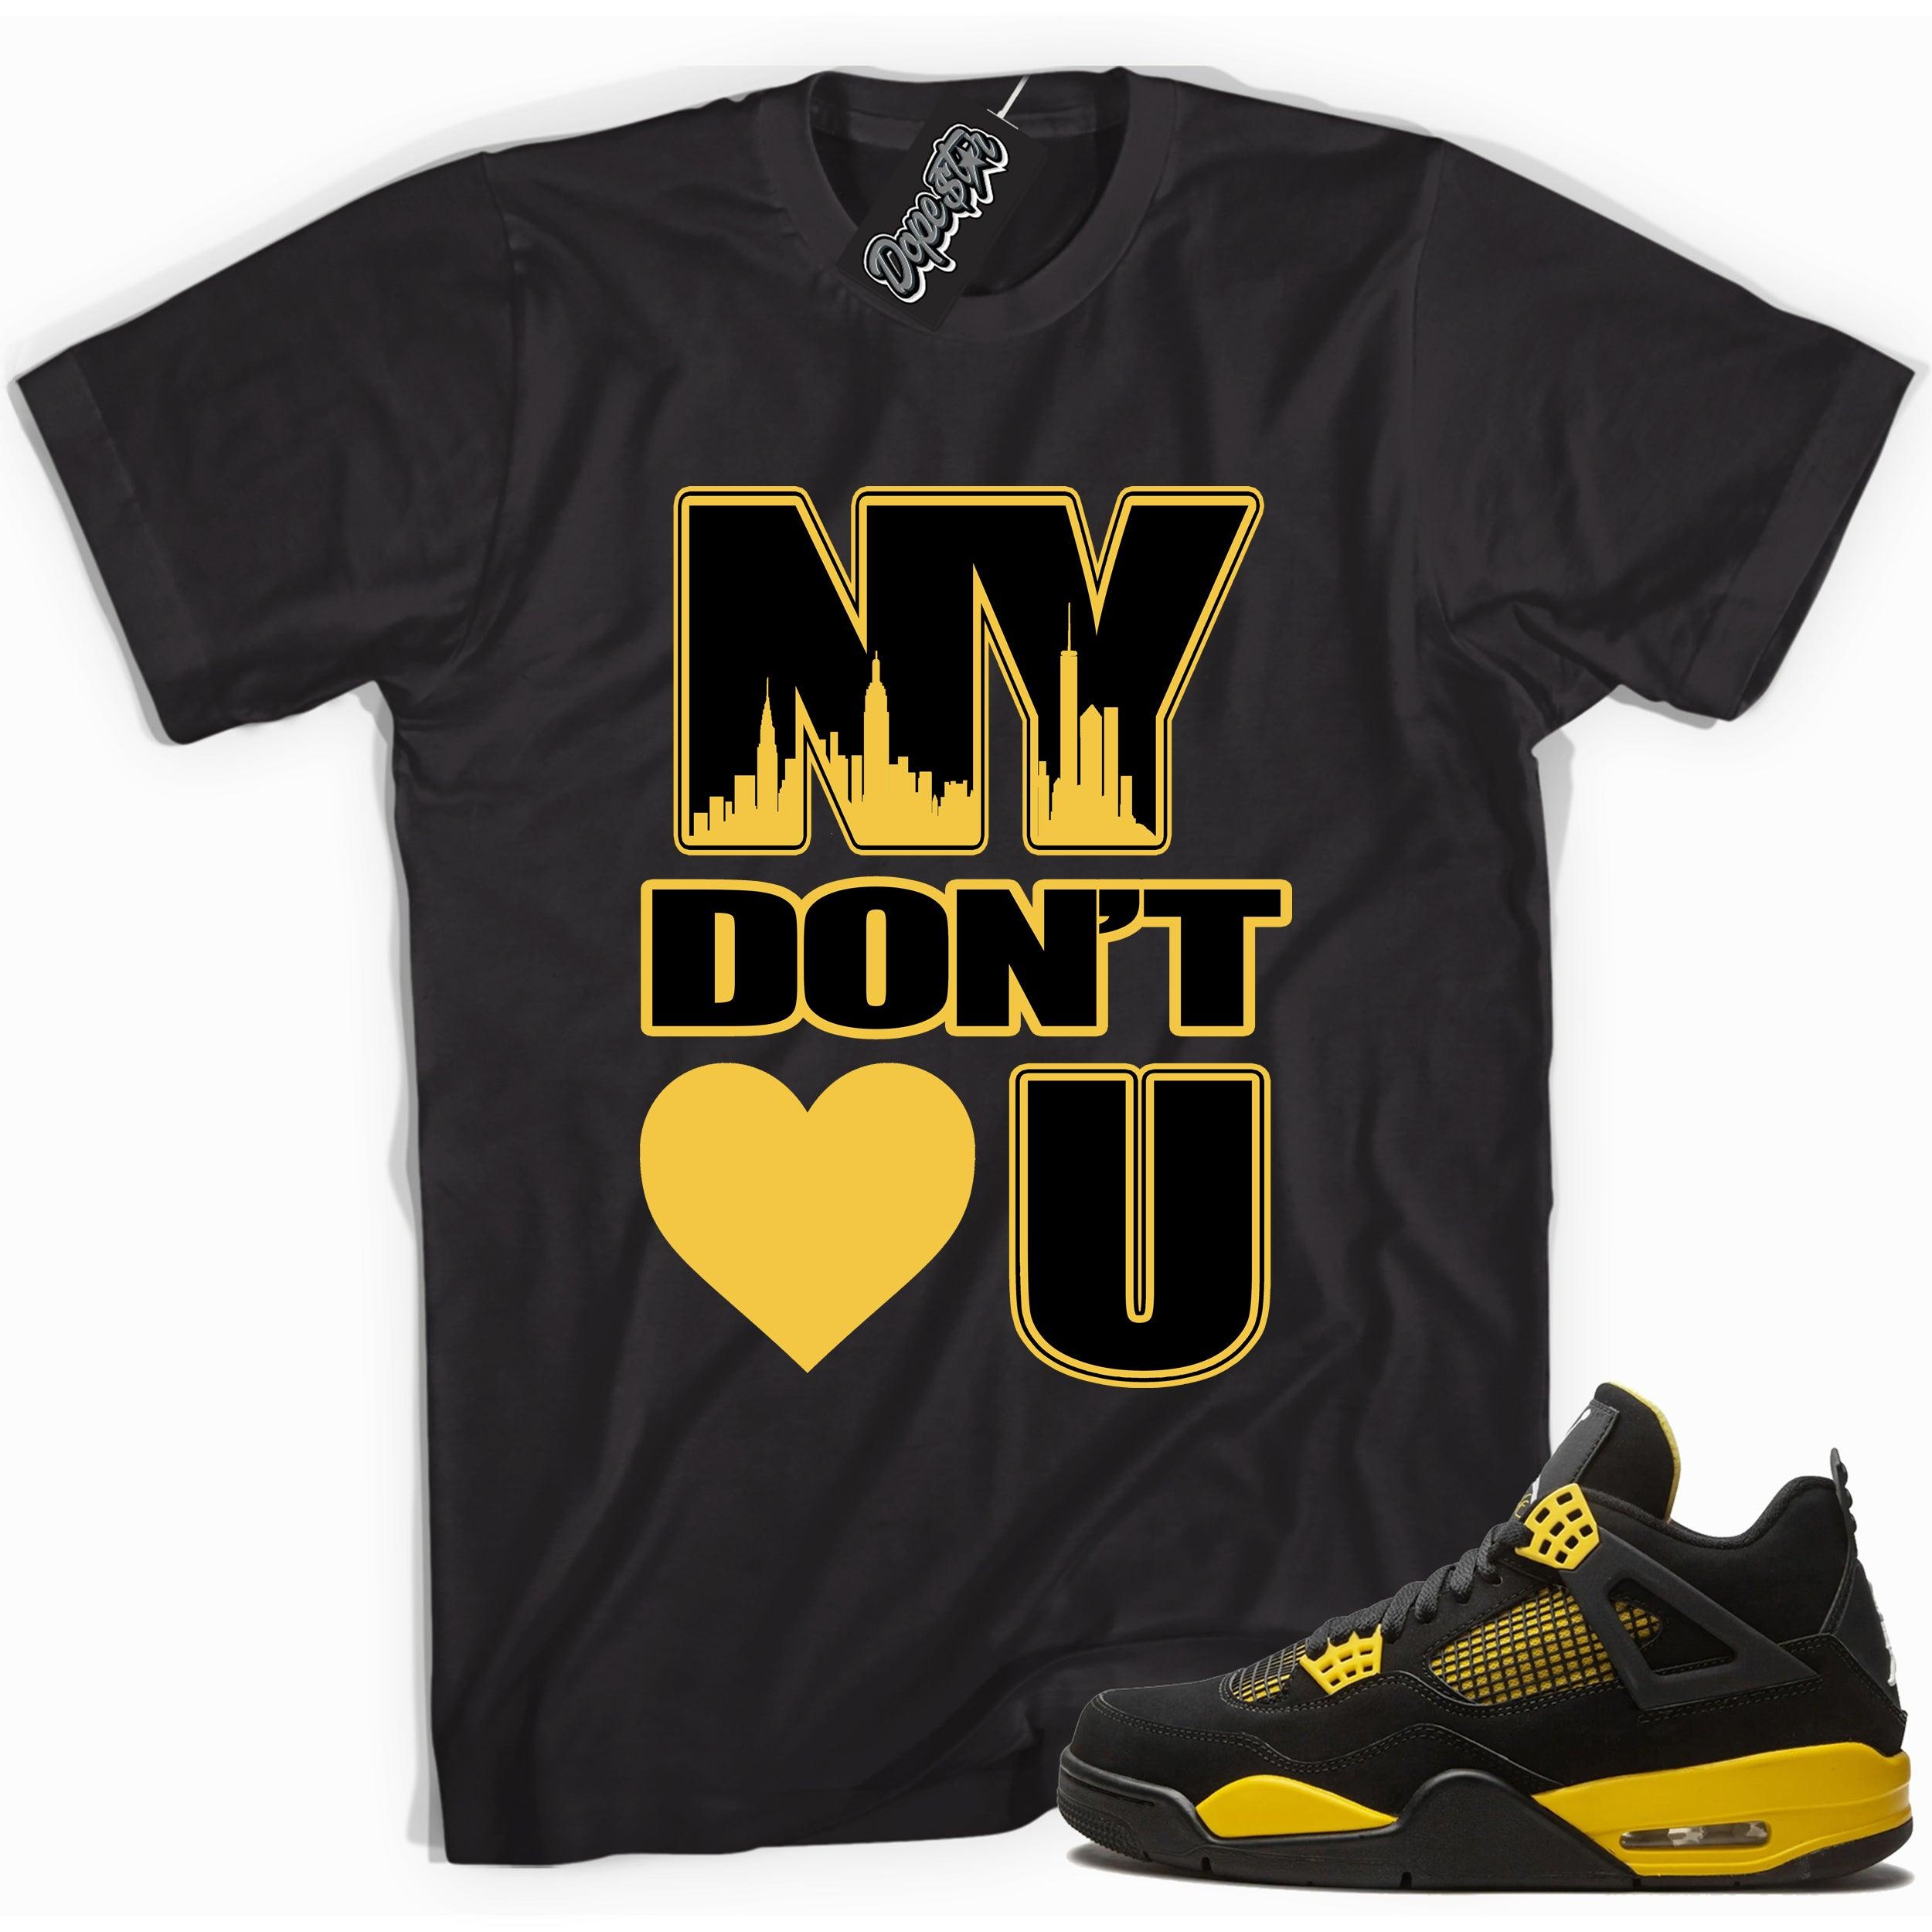 Cool black graphic tee with 'ny dont love you' print, that perfectly matches  Air Jordan 4 Thunder sneakers